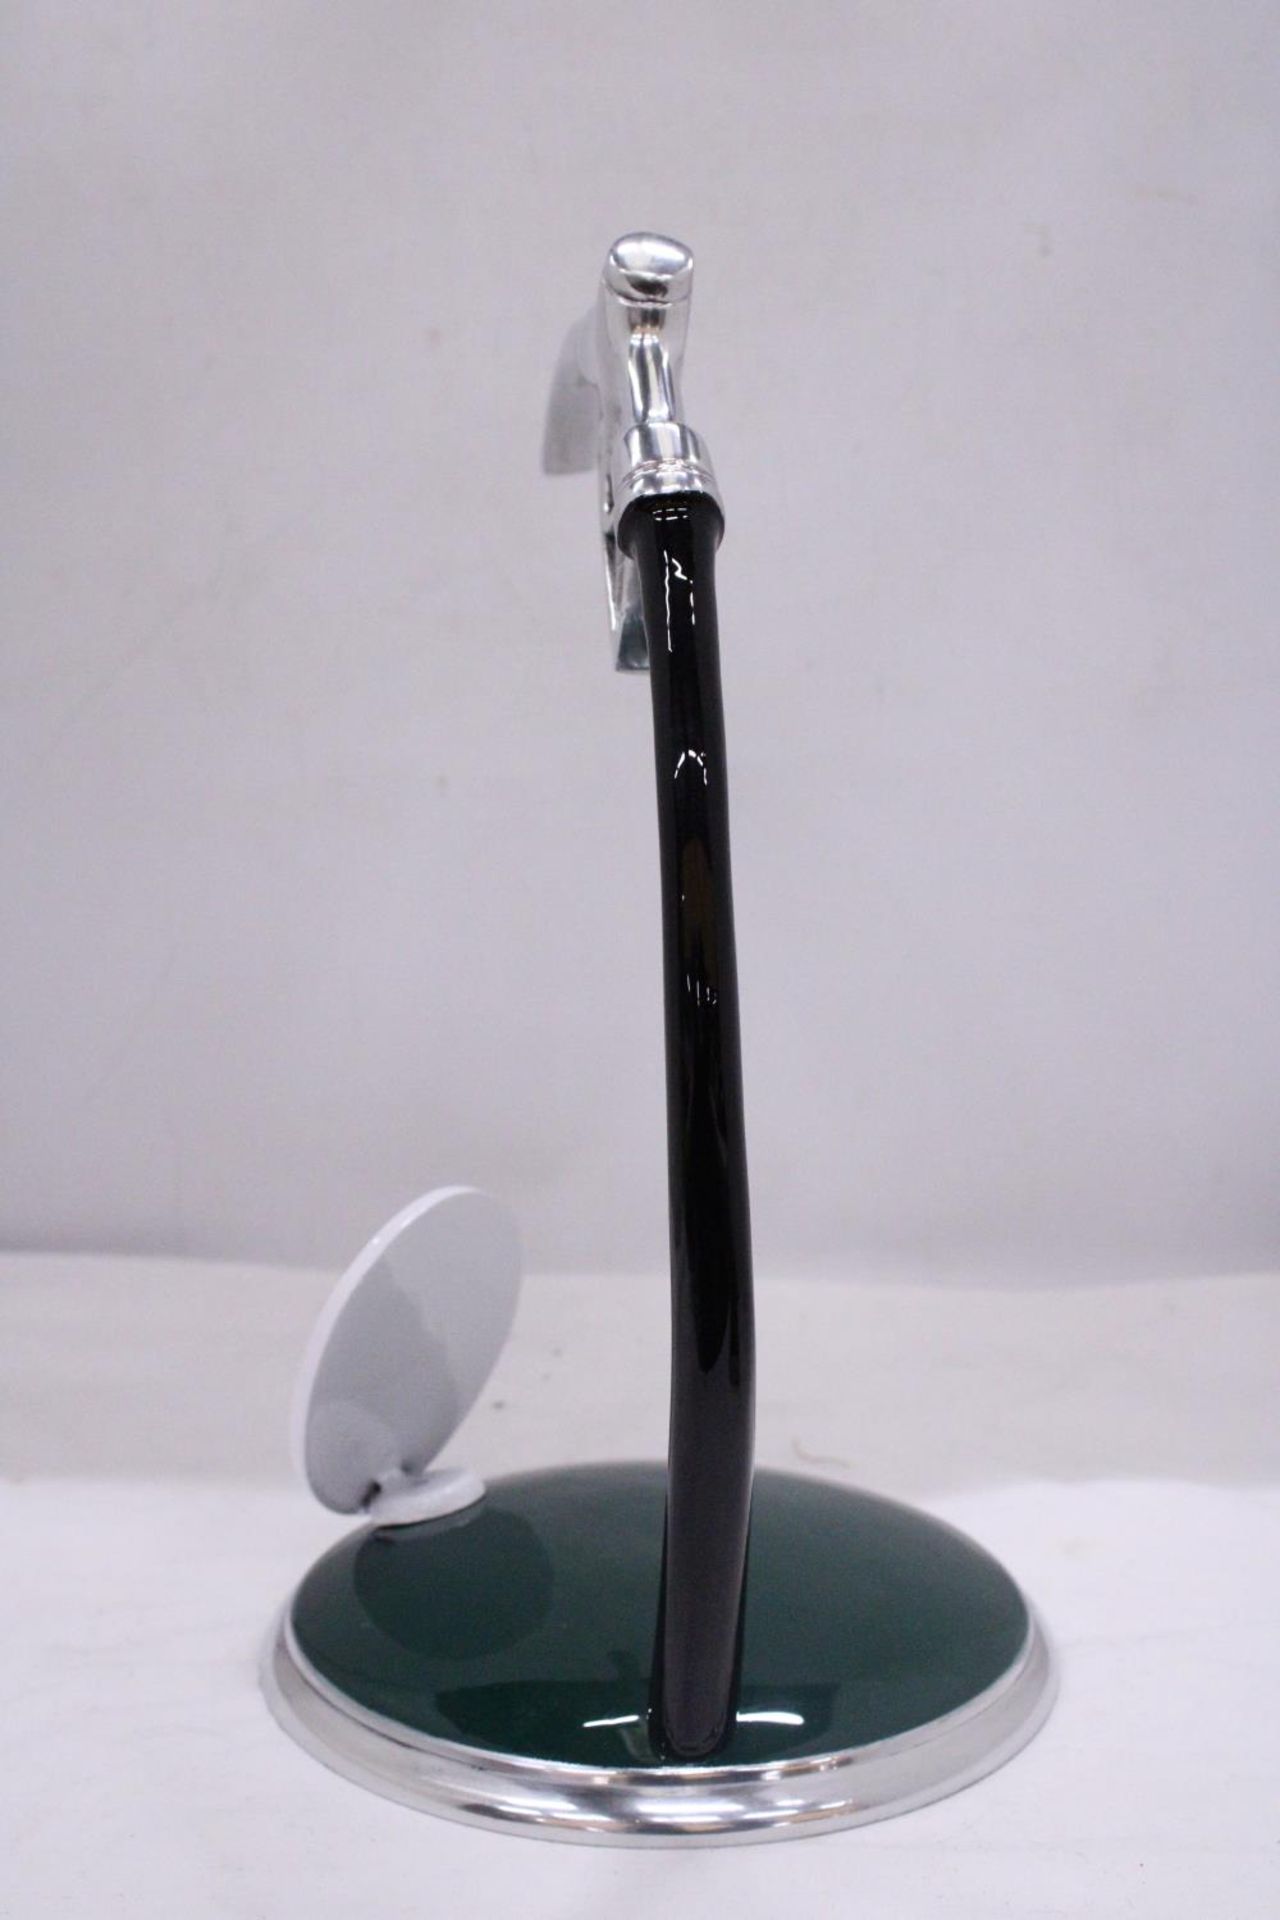 A GREEN CASTROL PETROL PUMP HANDLE ON A BASE, HEIGHT 34CM - Image 3 of 3